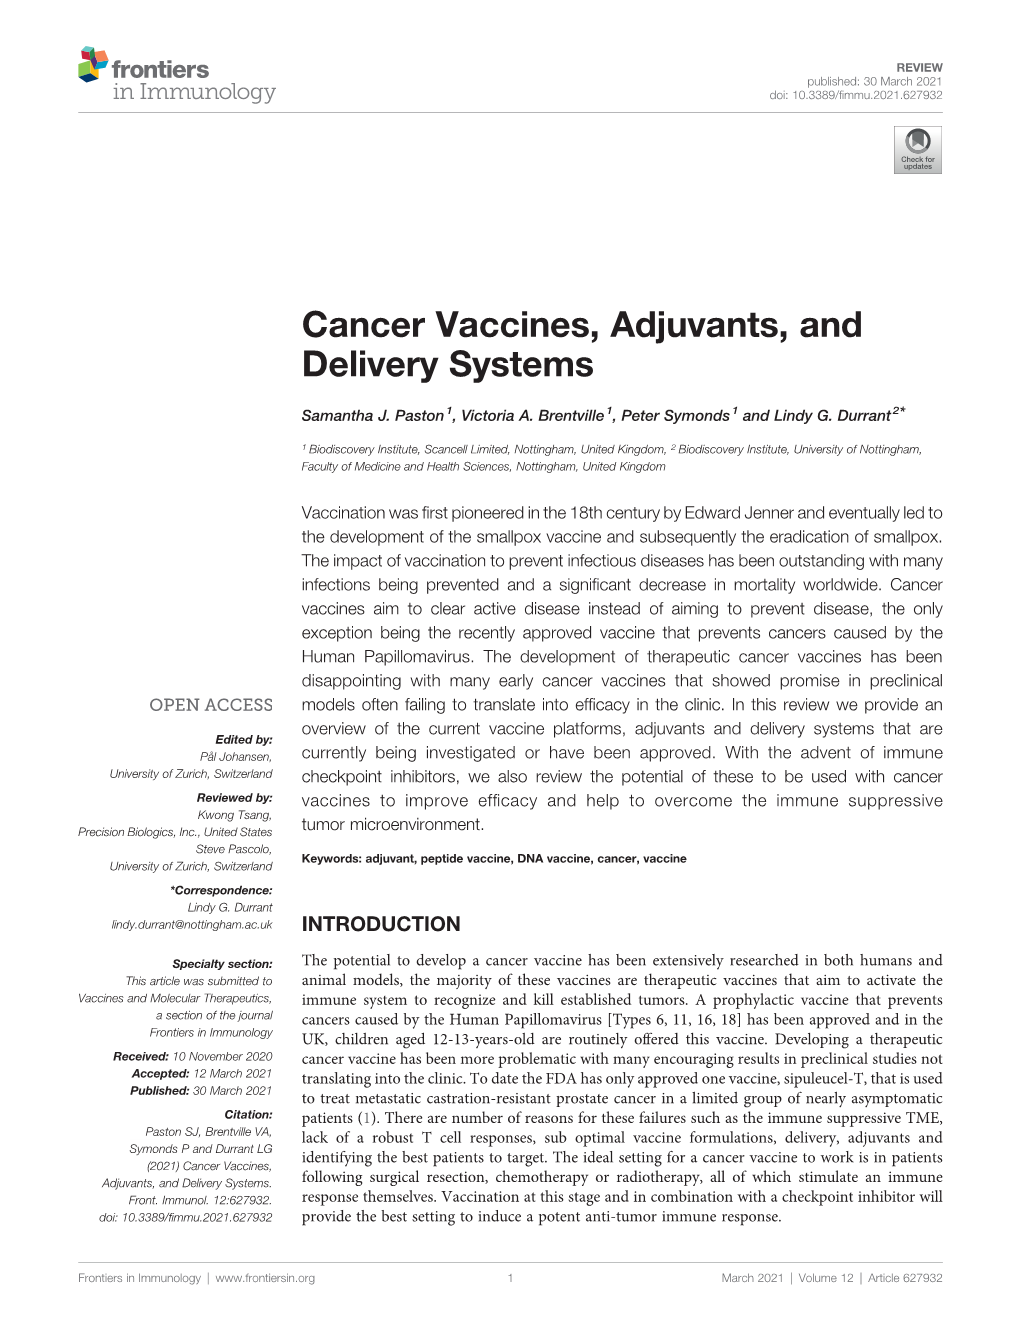 Cancer Vaccines, Adjuvants, and Delivery Systems